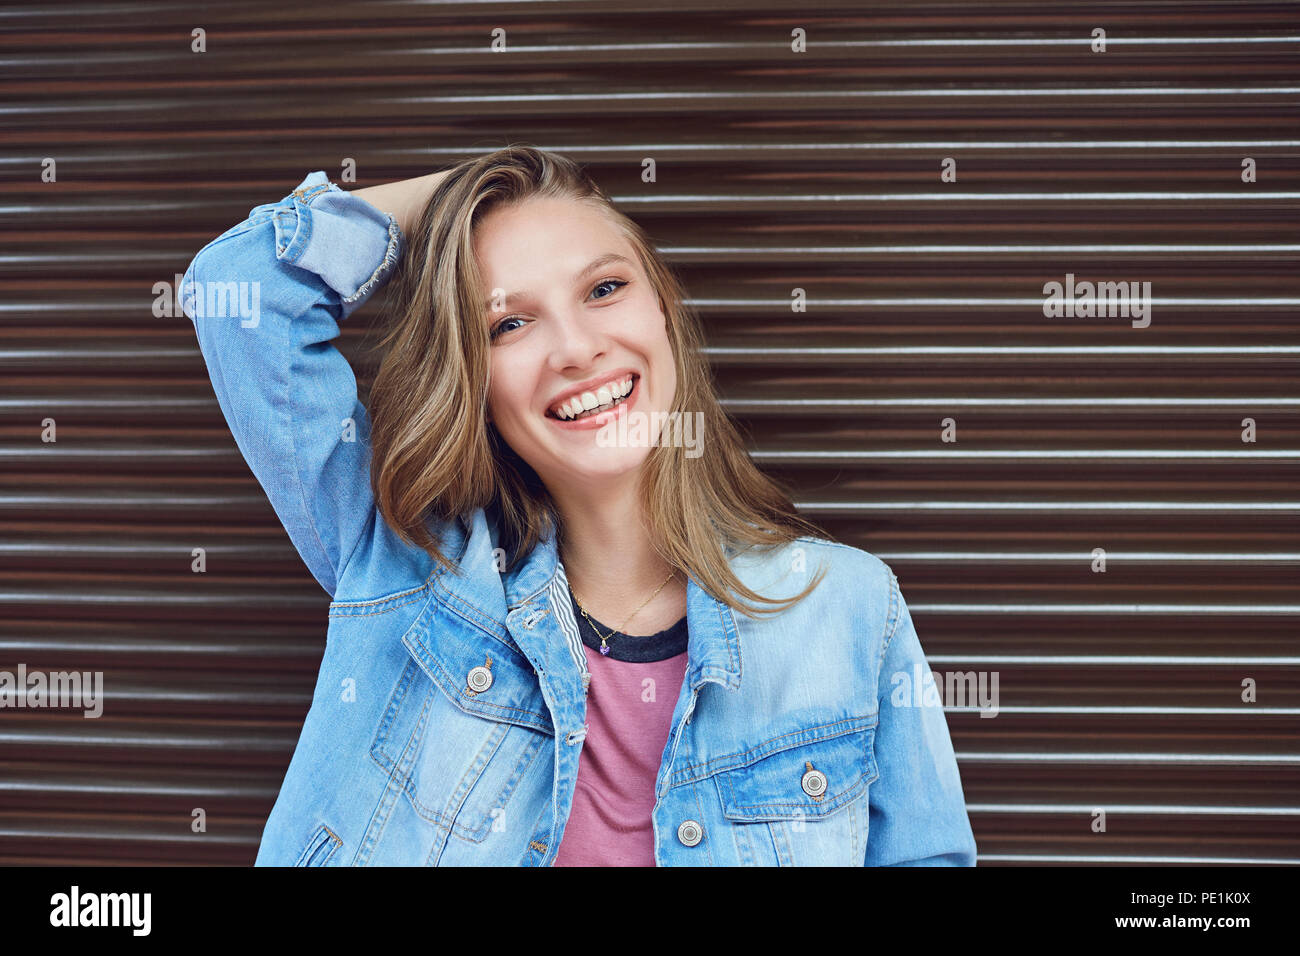 A blonde girl is smiling. Stock Photo